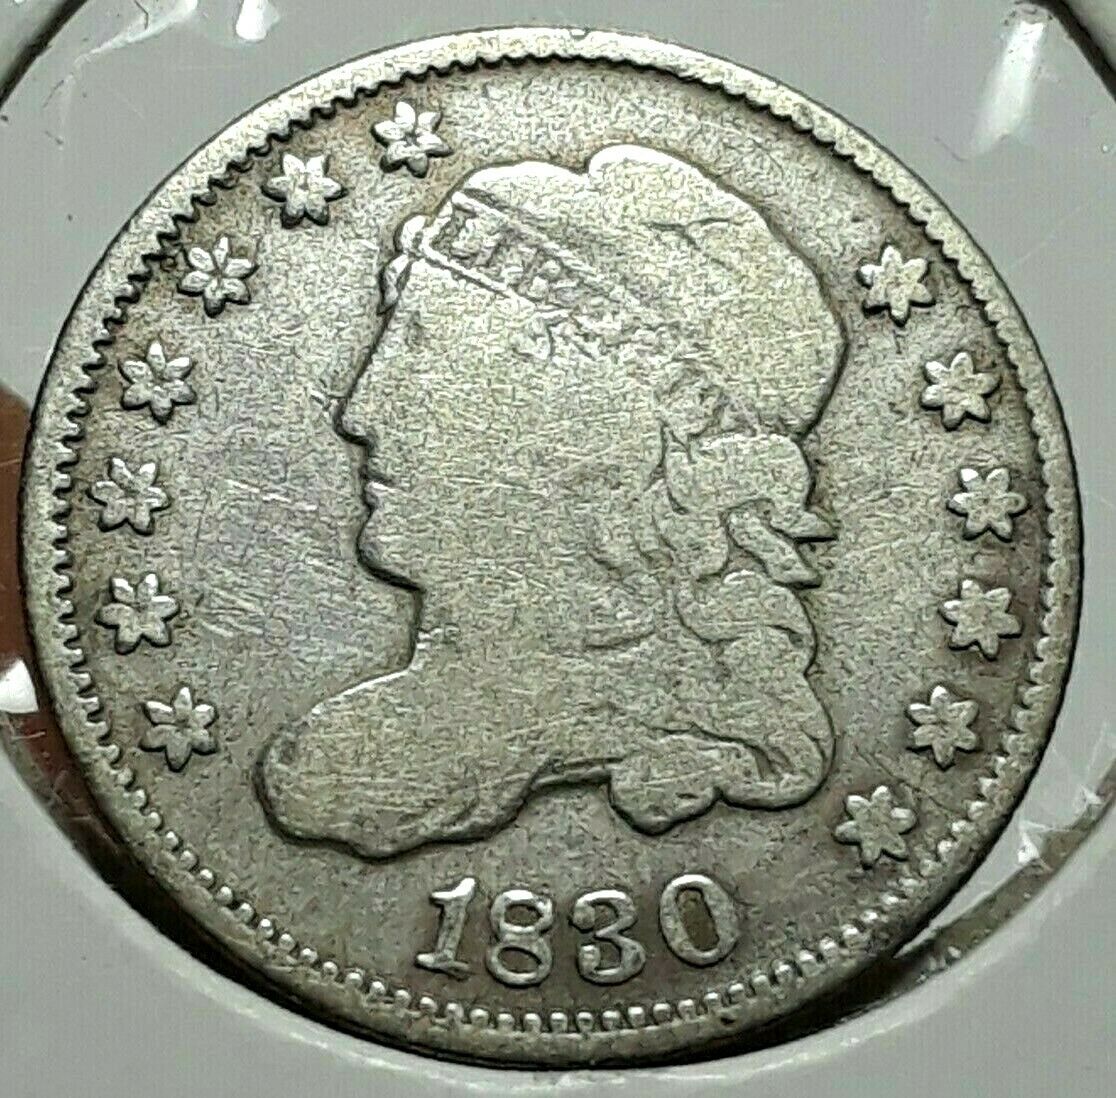 1830 5c Capped Bust Half Dime Silver Coin Circulated Condition